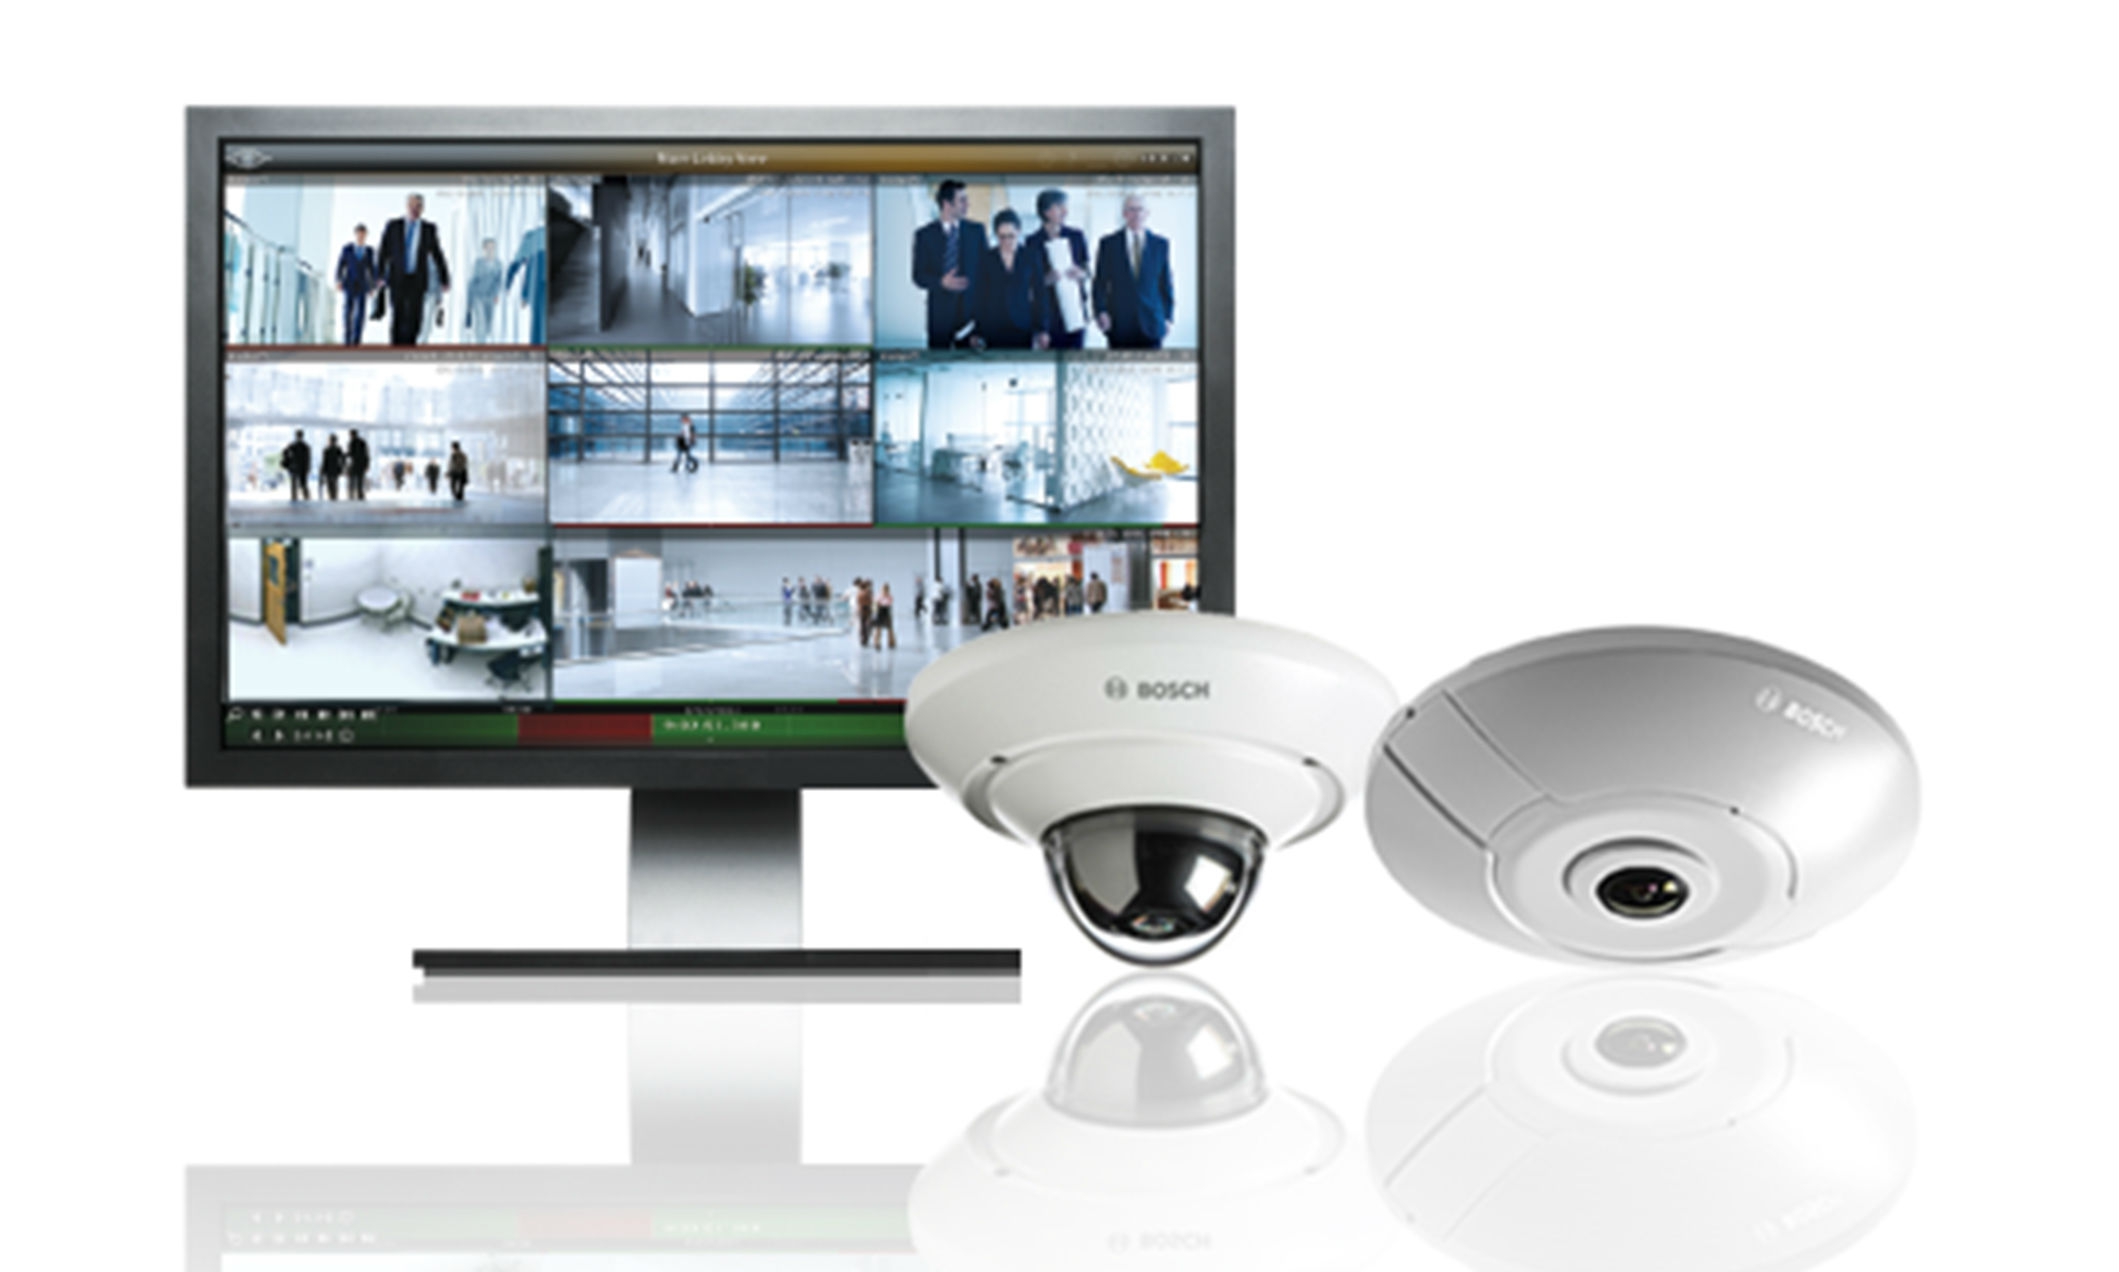 Ocularis 5 from OnSSI adds support for Bosch panoramic cameras